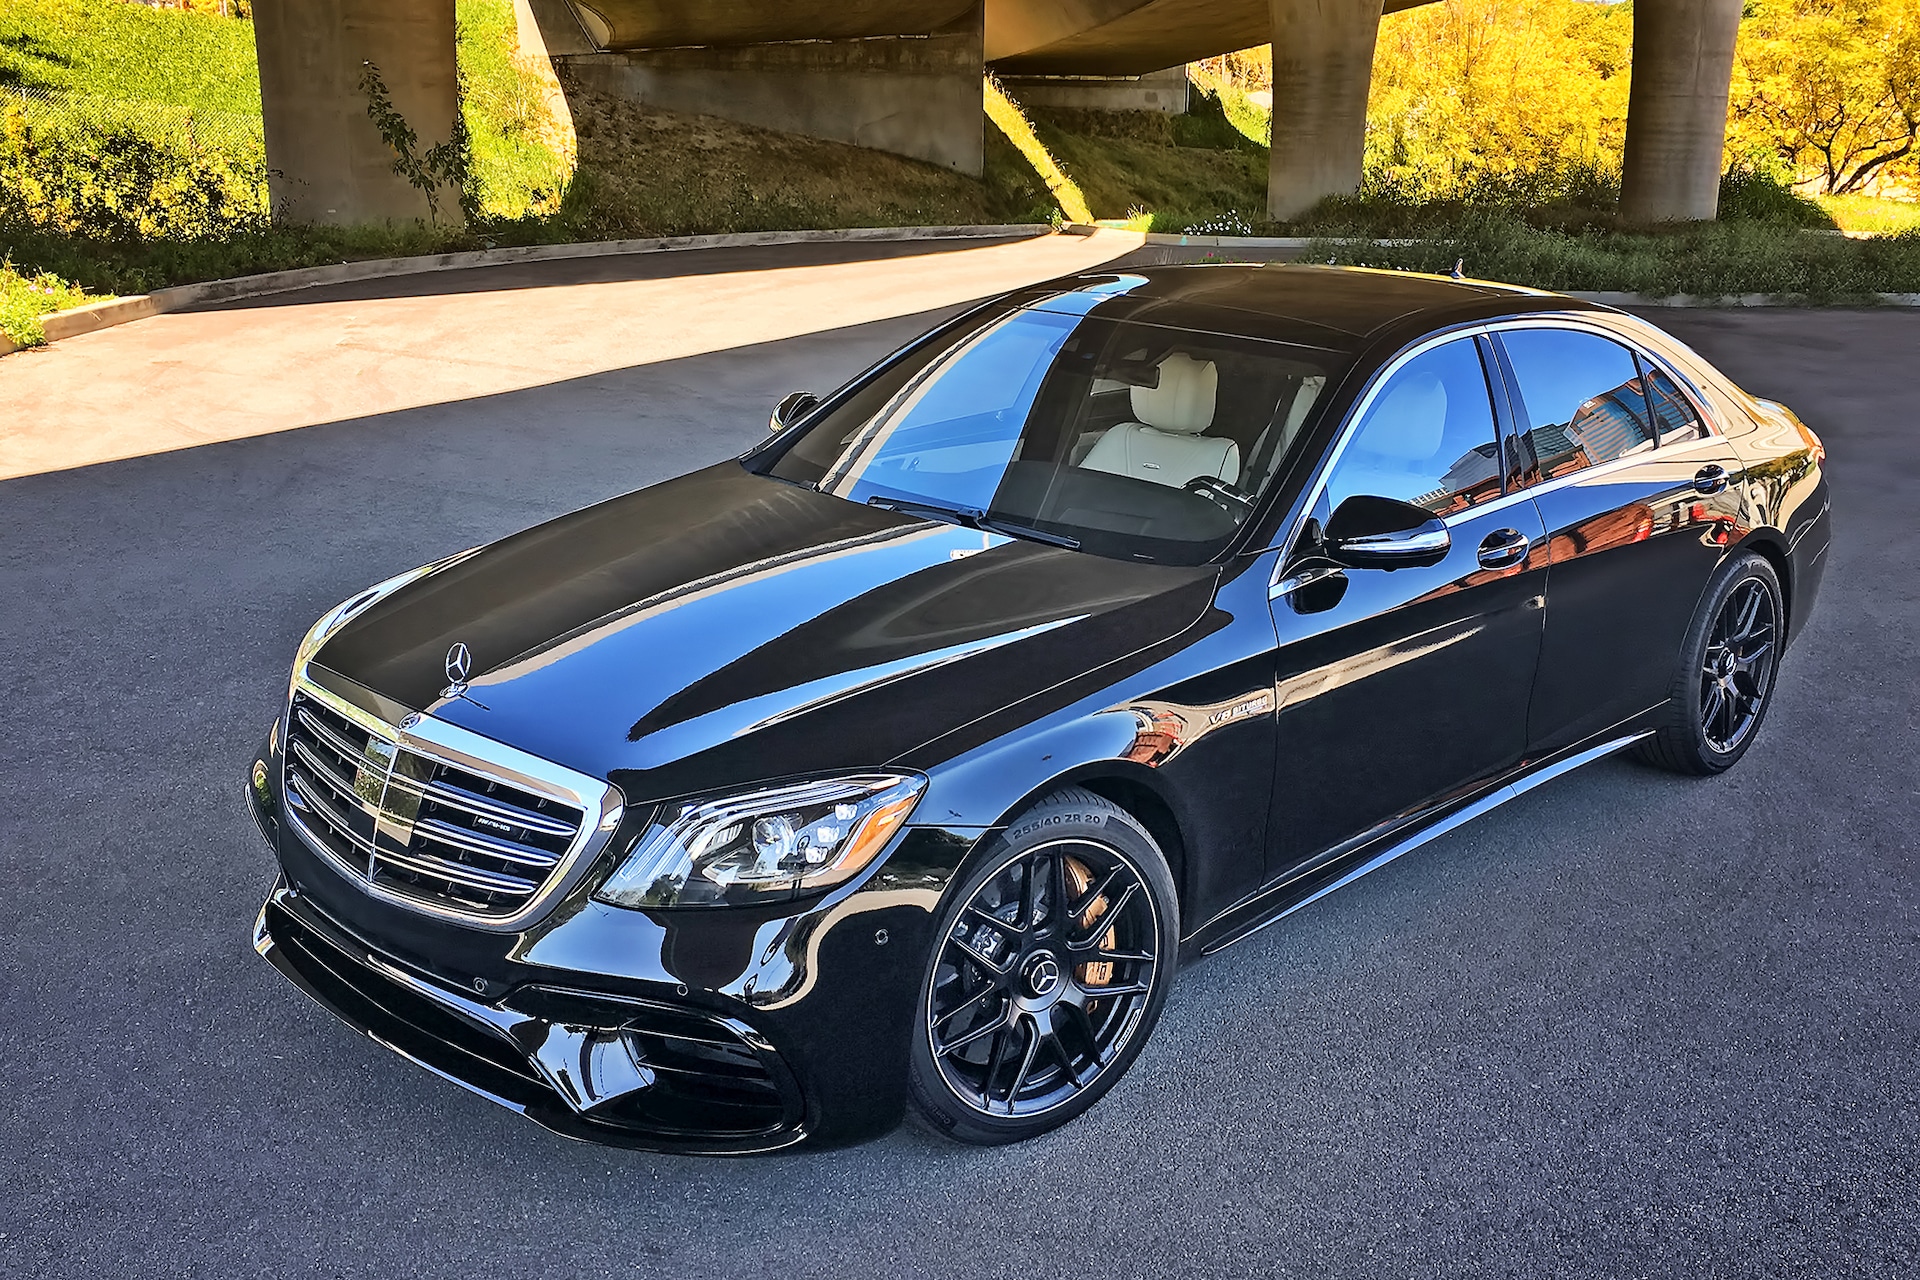 The Mercedes-AMG S63 Is the Best Luxury-Performance Sedan. Period.